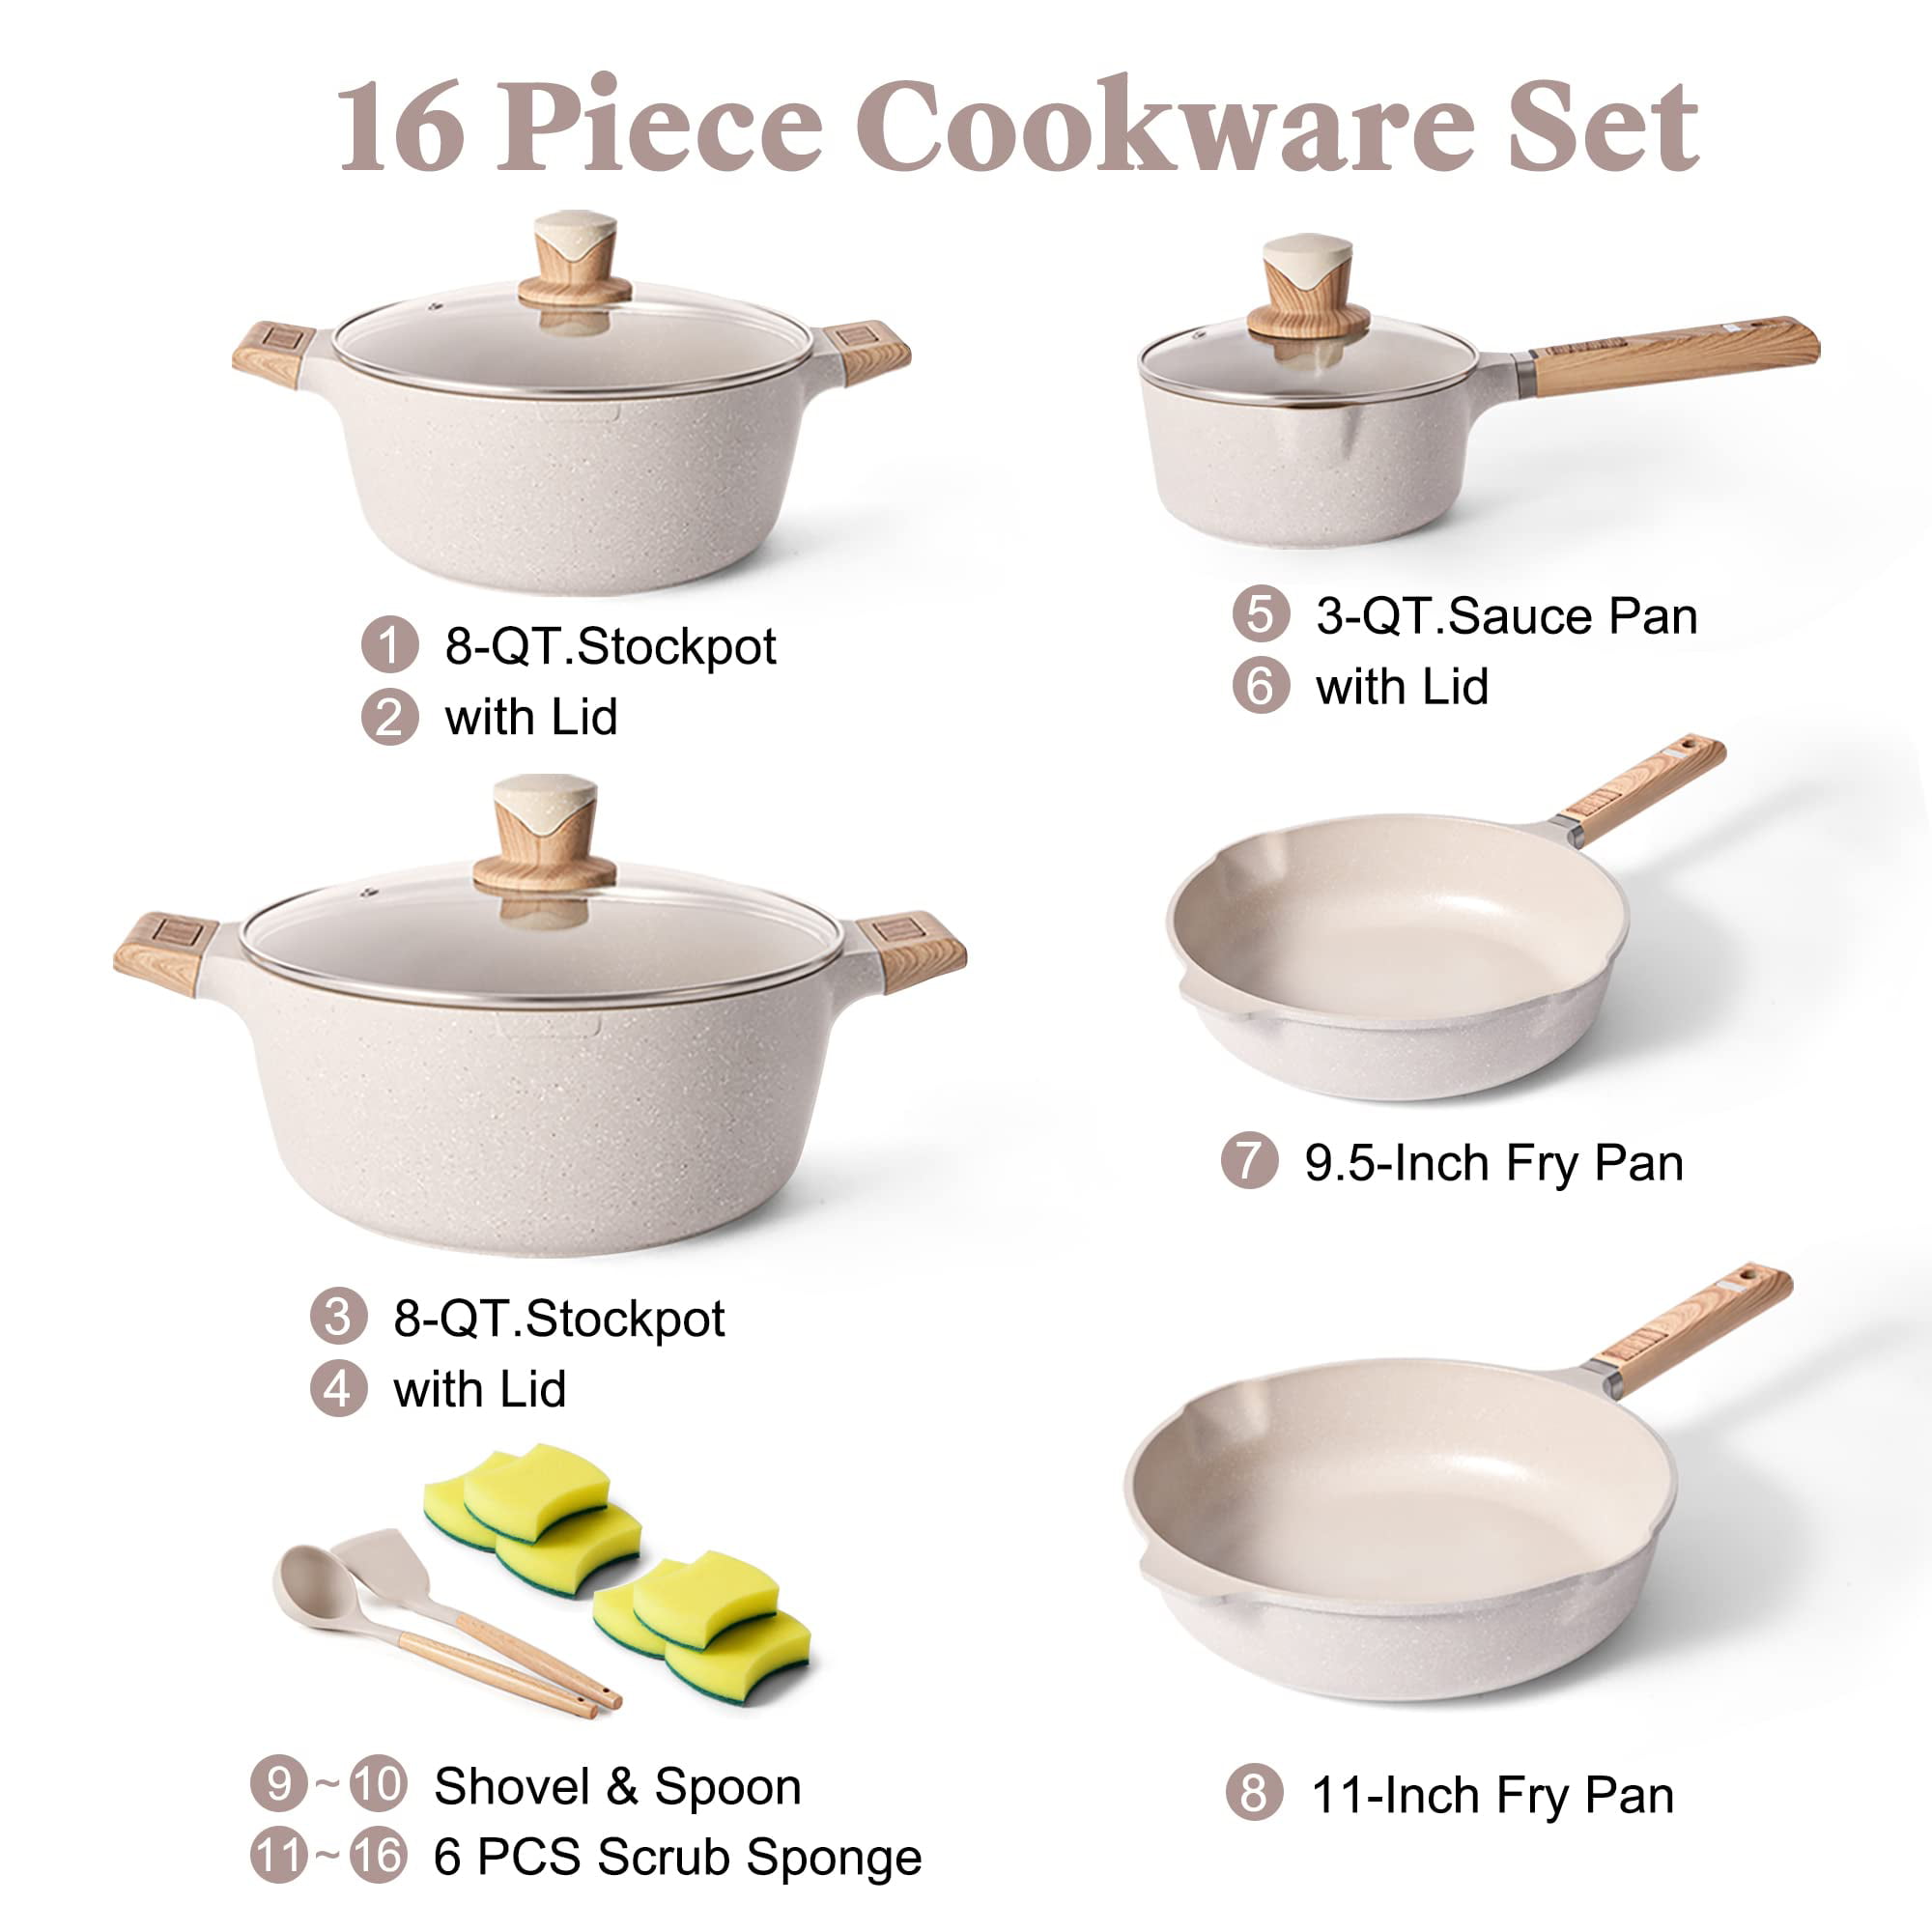 Cookware Set - Large Nonstick Pots and Pans Set Cooking Pot and